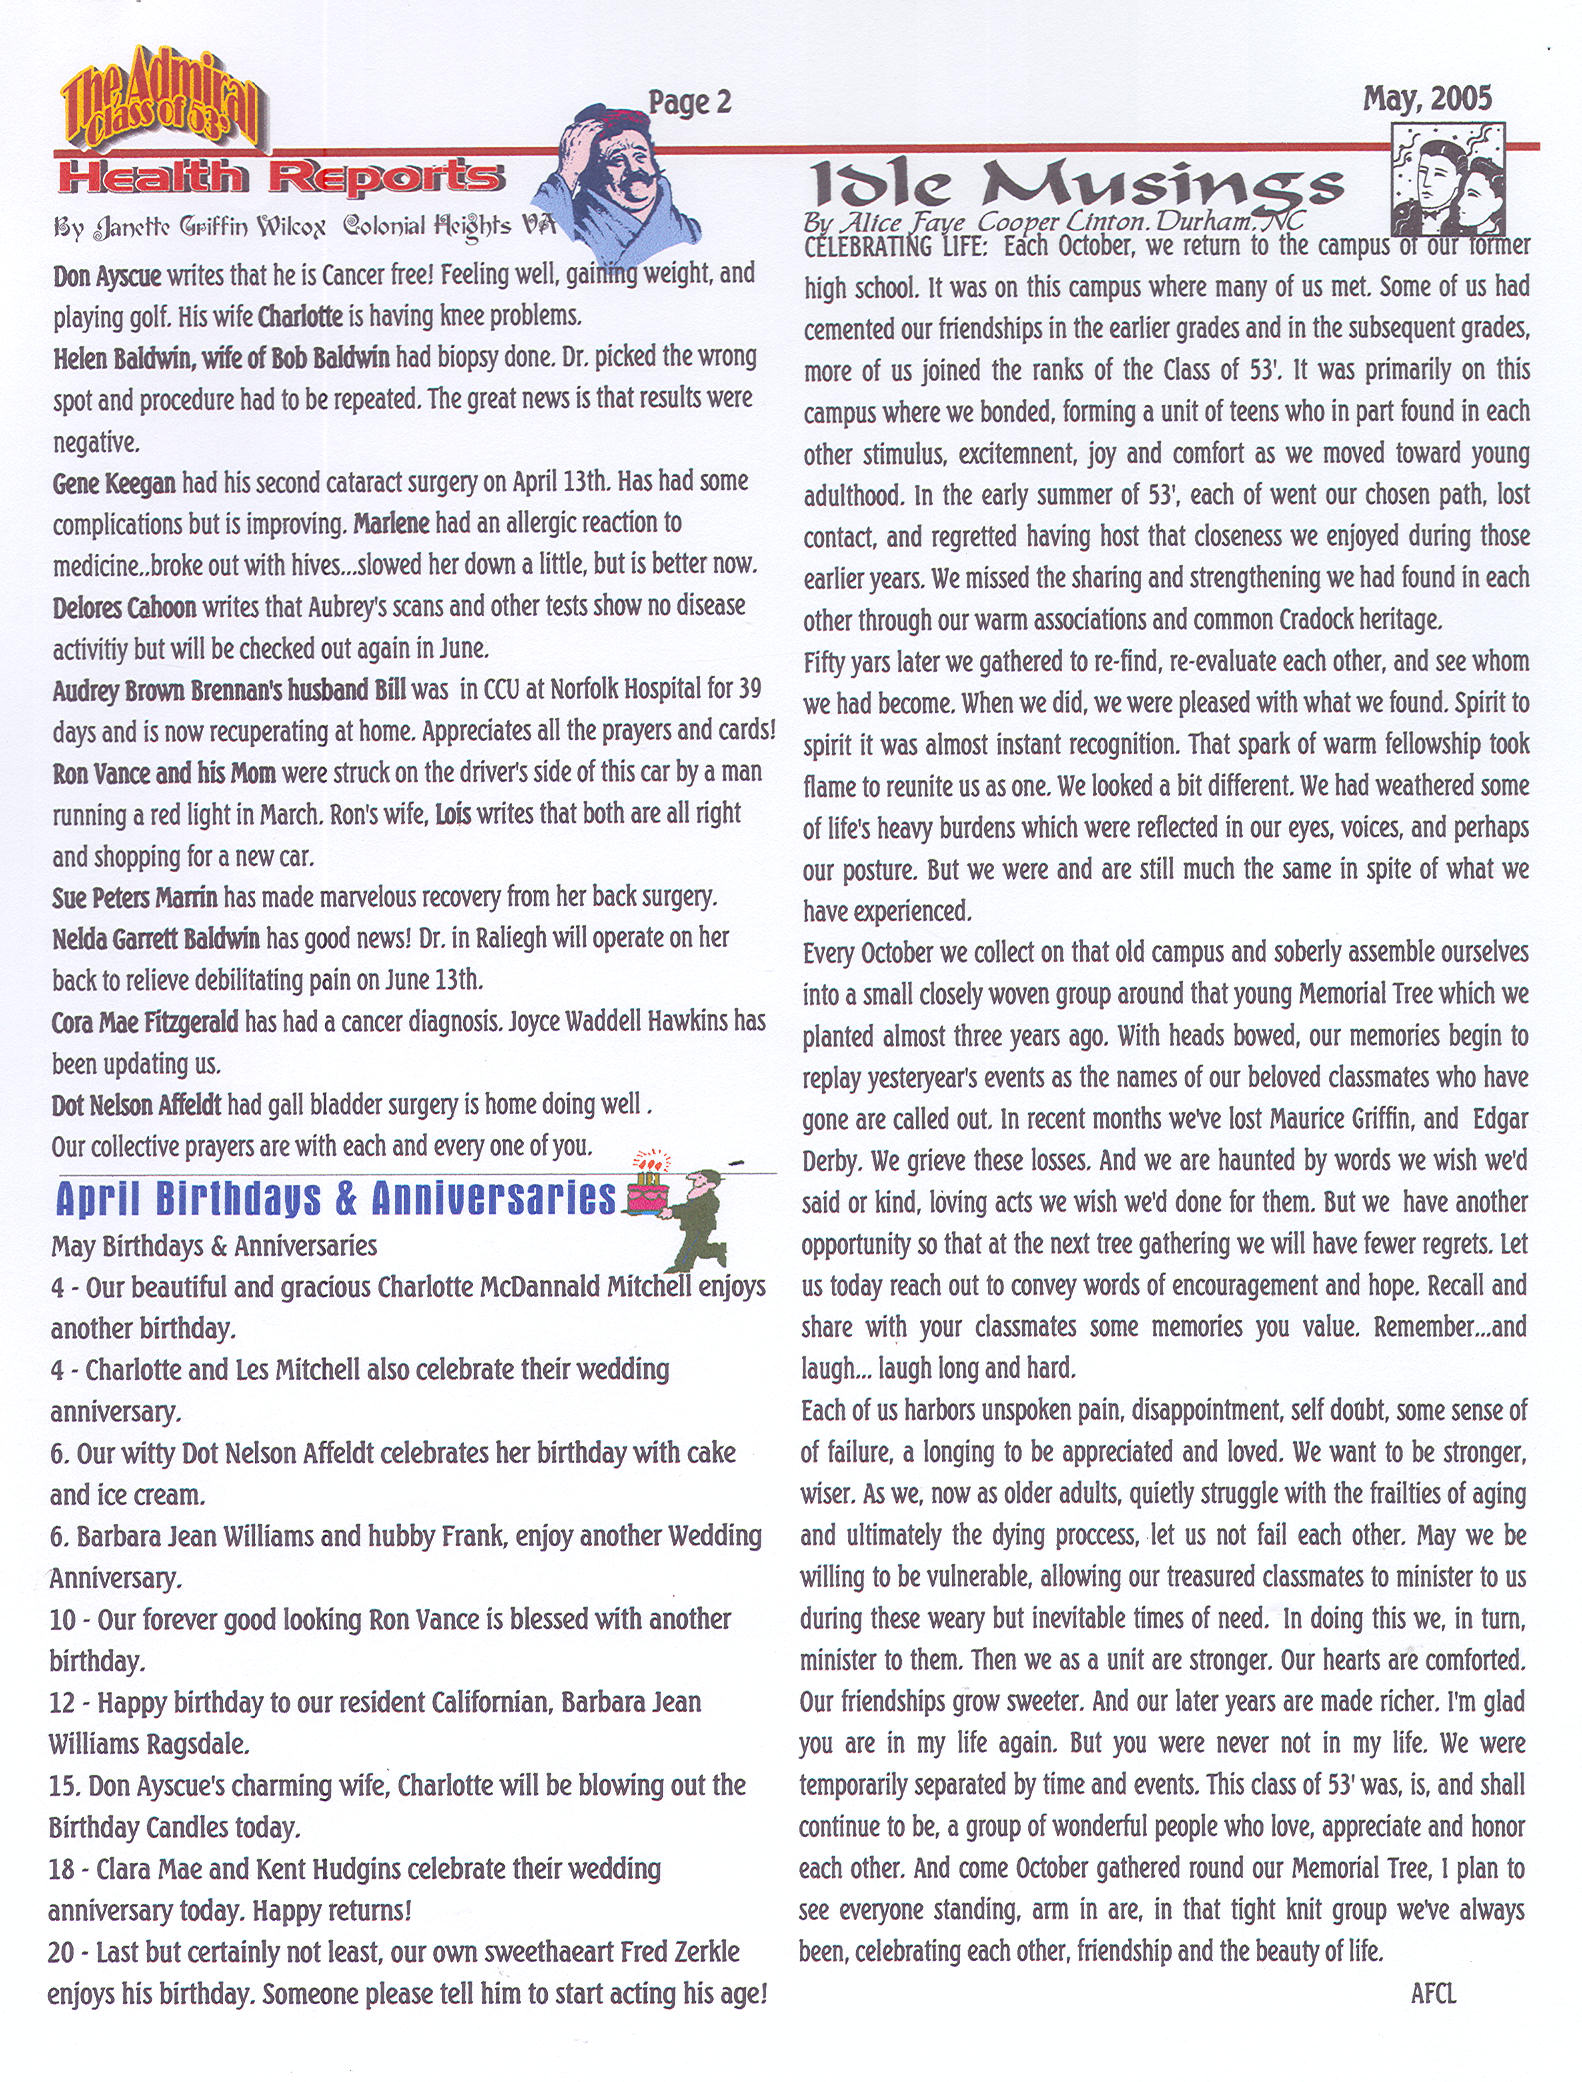 The Admiral - May 2005 - pg. 2